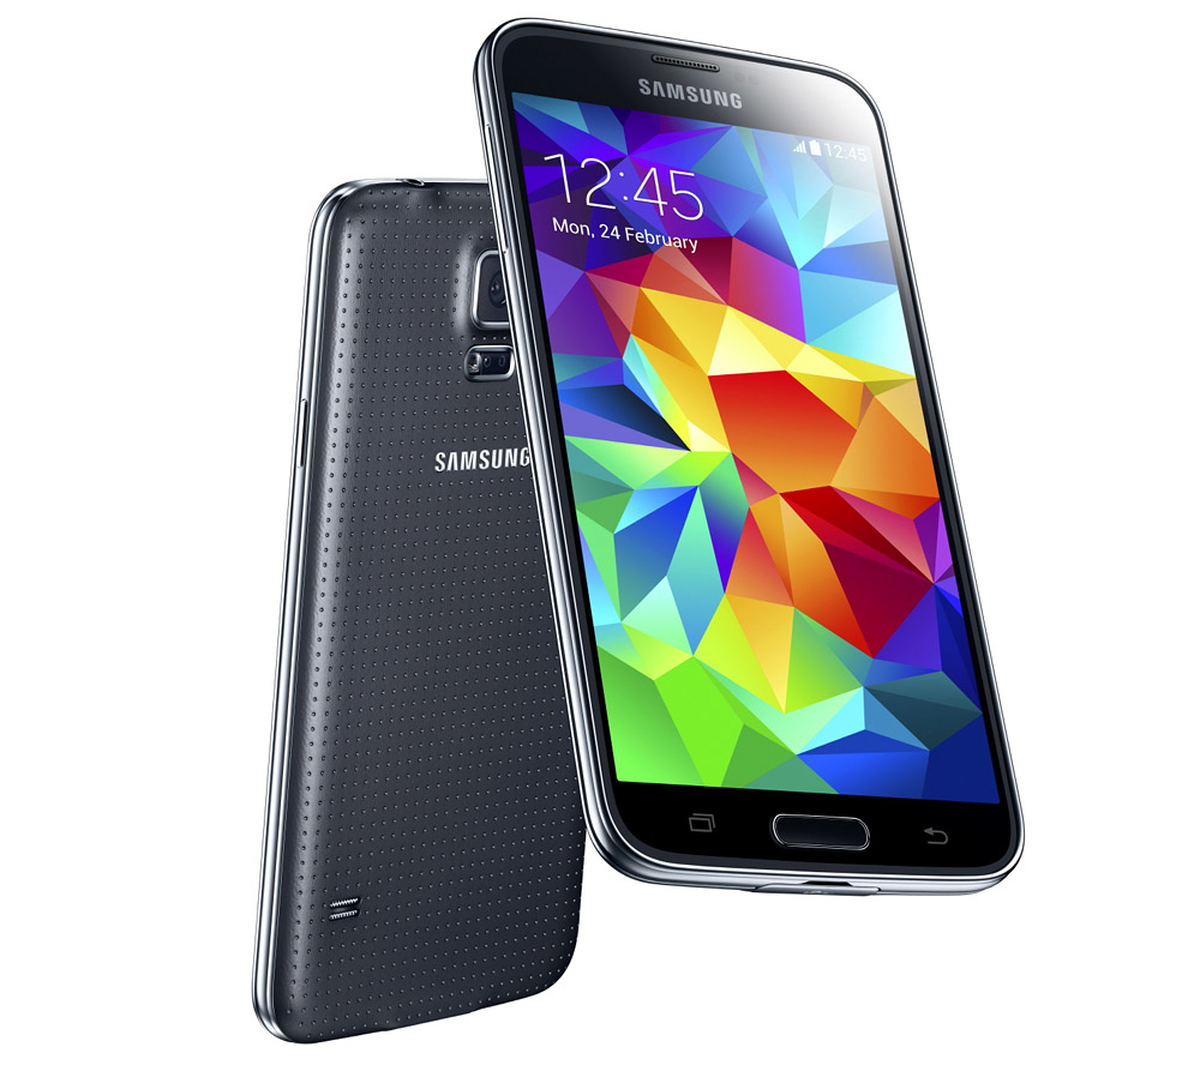 Samsung Galaxy S5 : Specifications and Opinions | JuzaPhoto